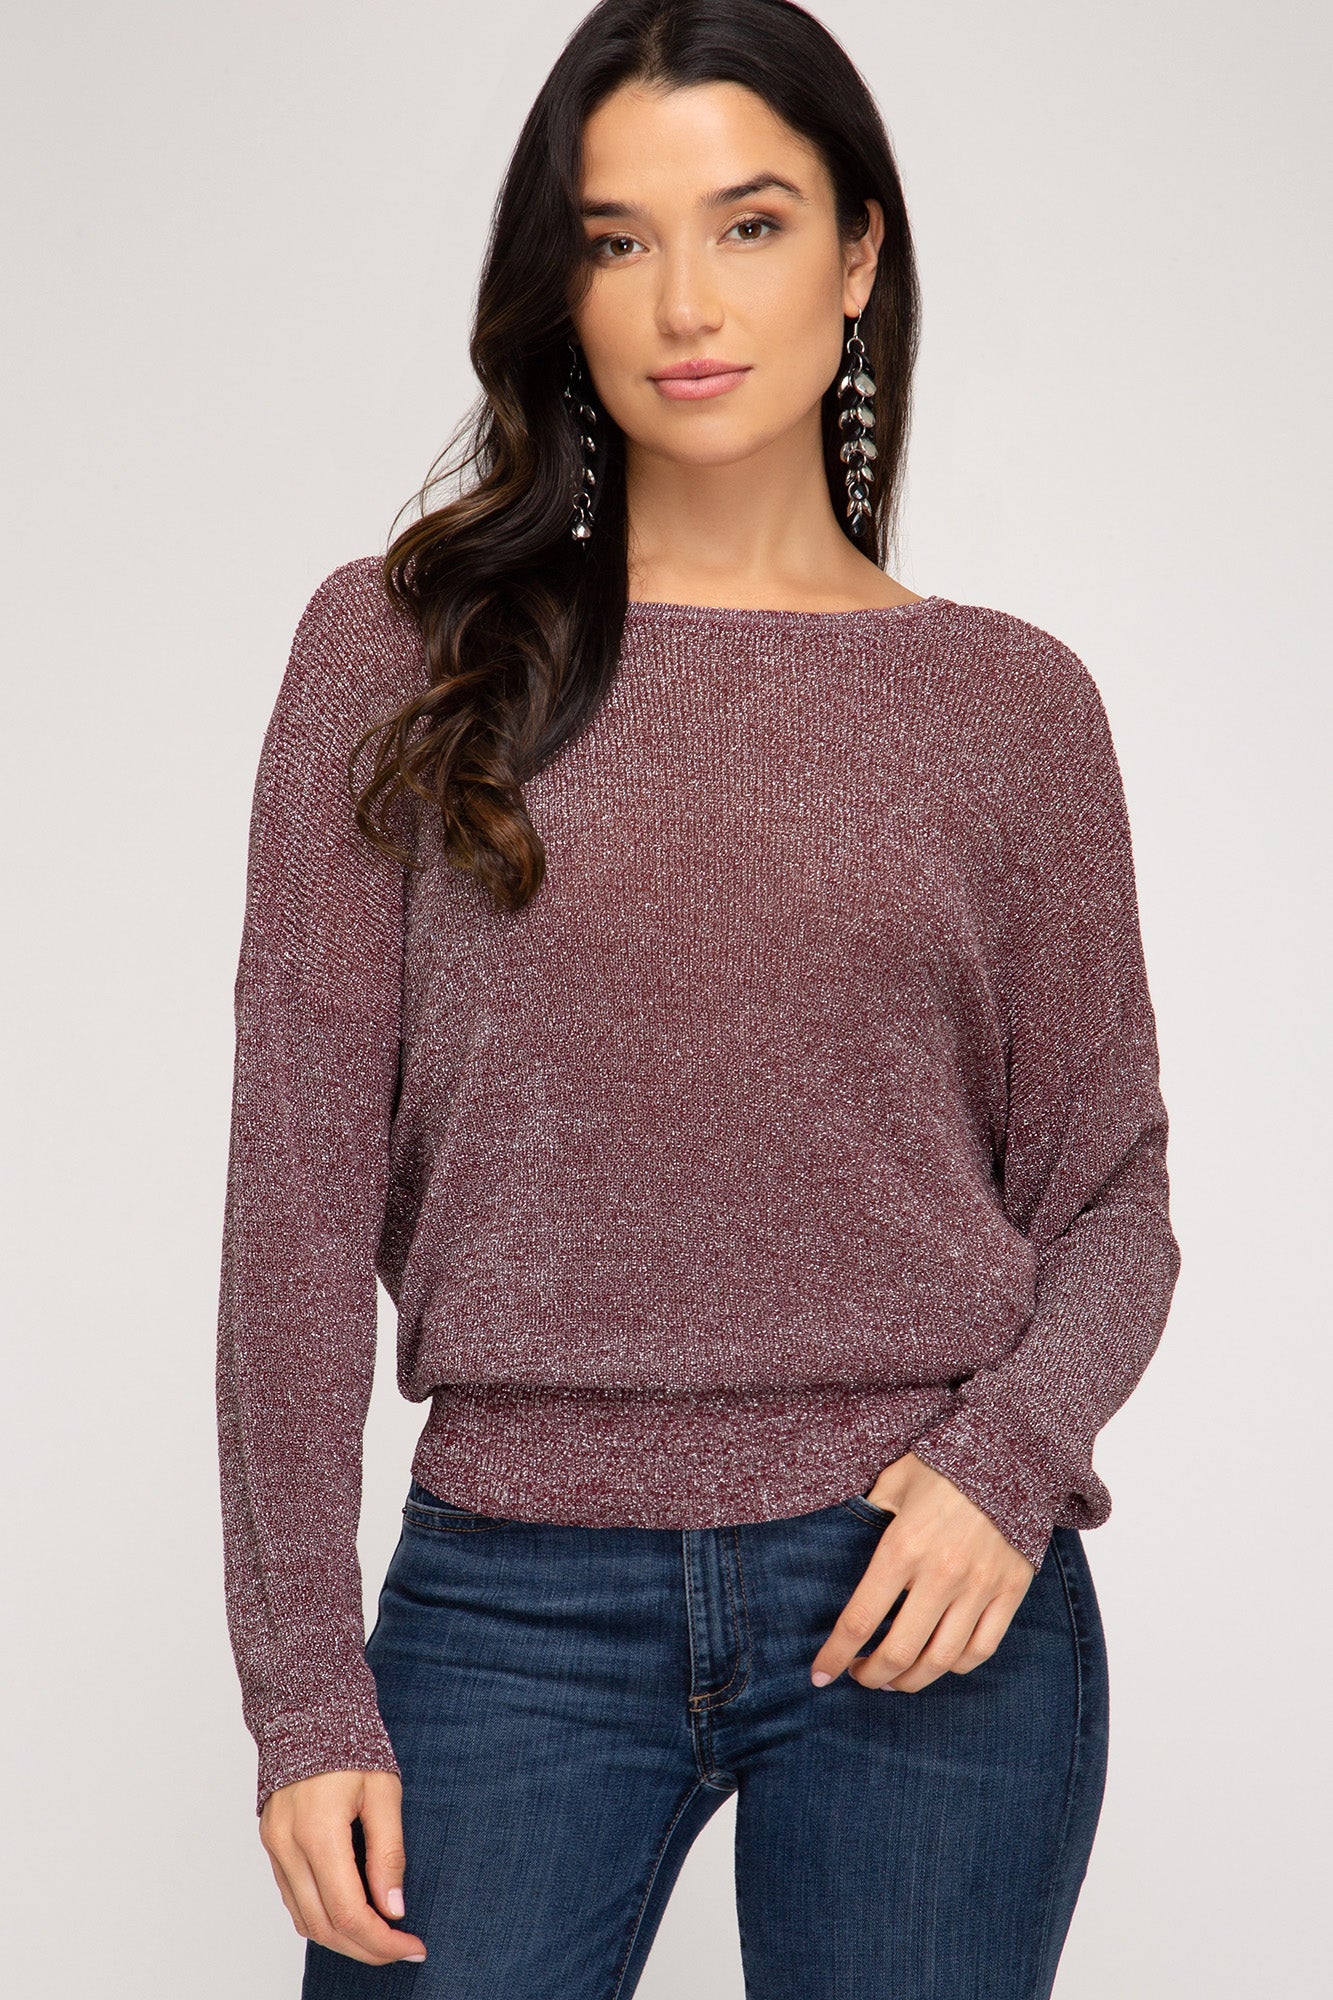 Long Sleeve Sweater With Sparkly Detail And Open Back!